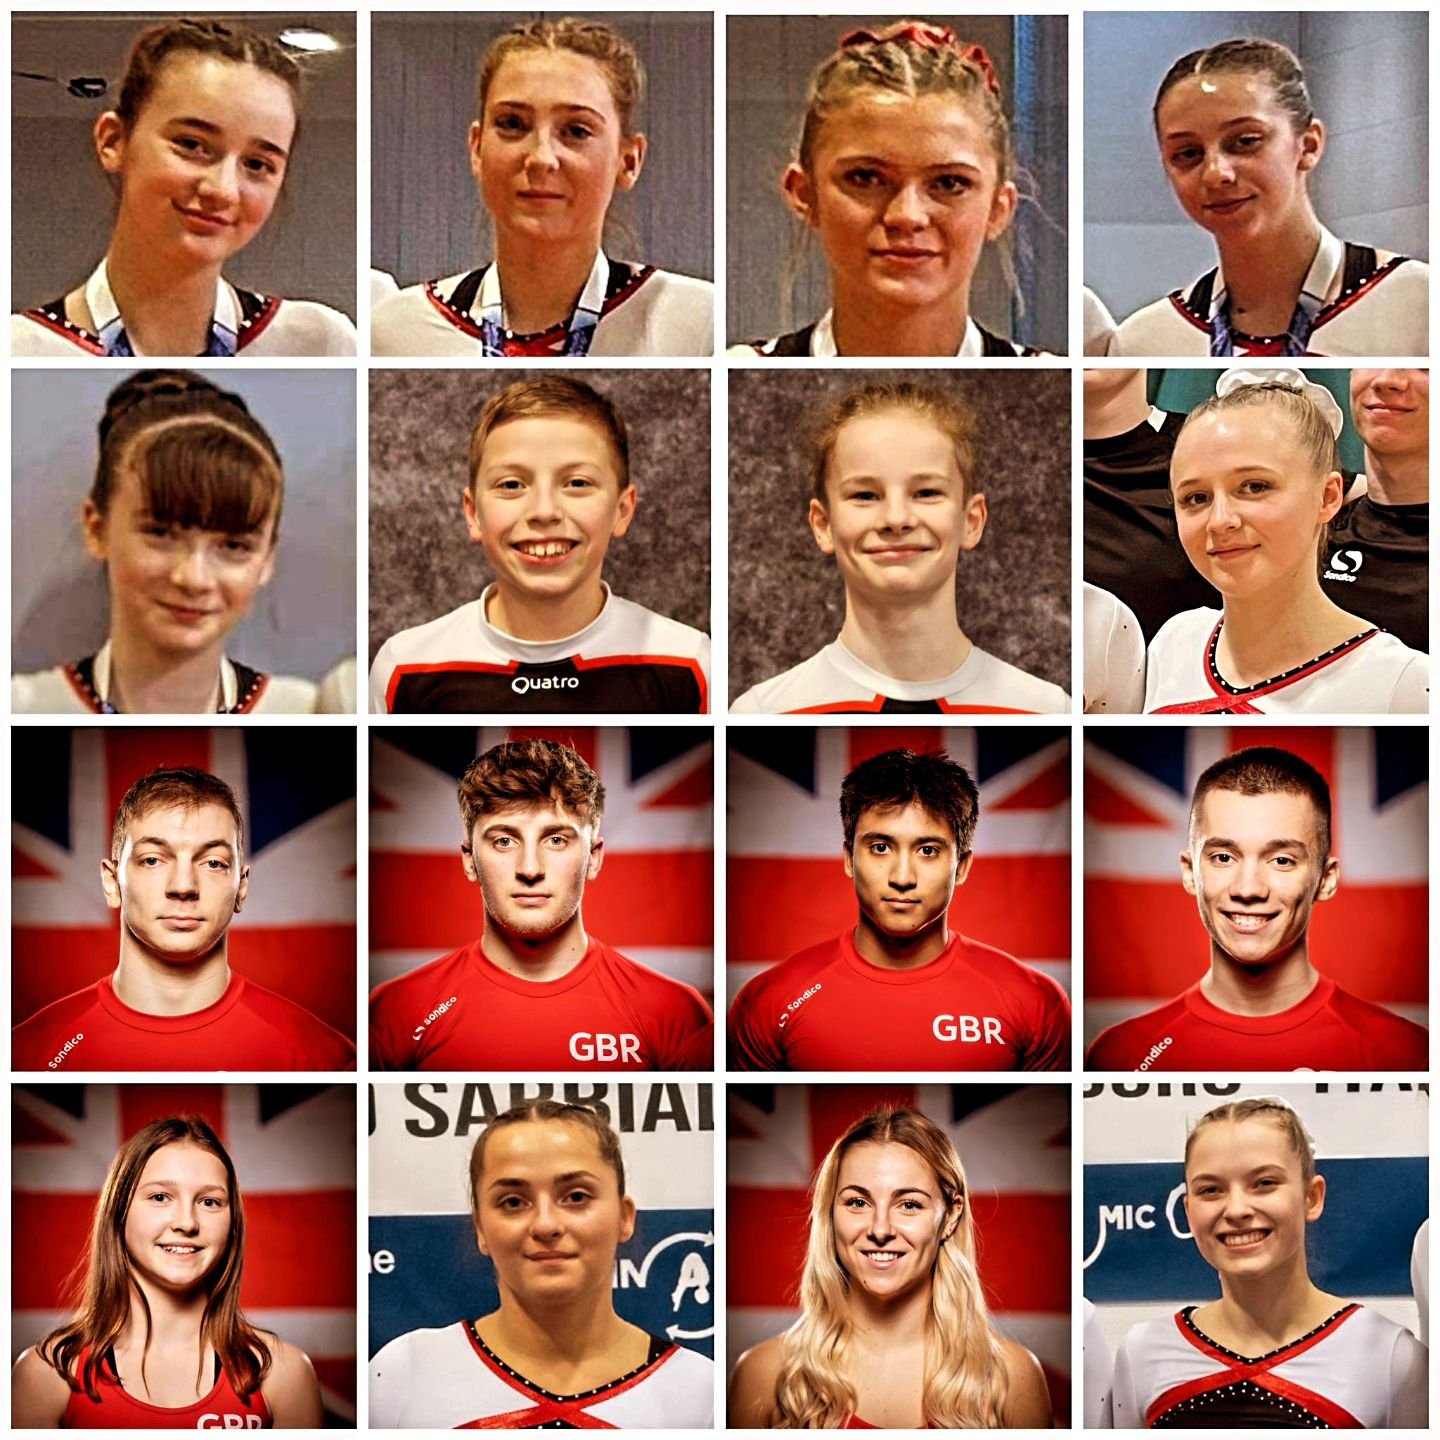 Very proud of all of our gymnasts who went for GBR selection this year. Congratulations to those who were selected this time to represent GBR at the European Championships in Baku 🇦🇿 this October: 

Senior Mixed
- Amelia Campion
- Lewis Clothier
- 